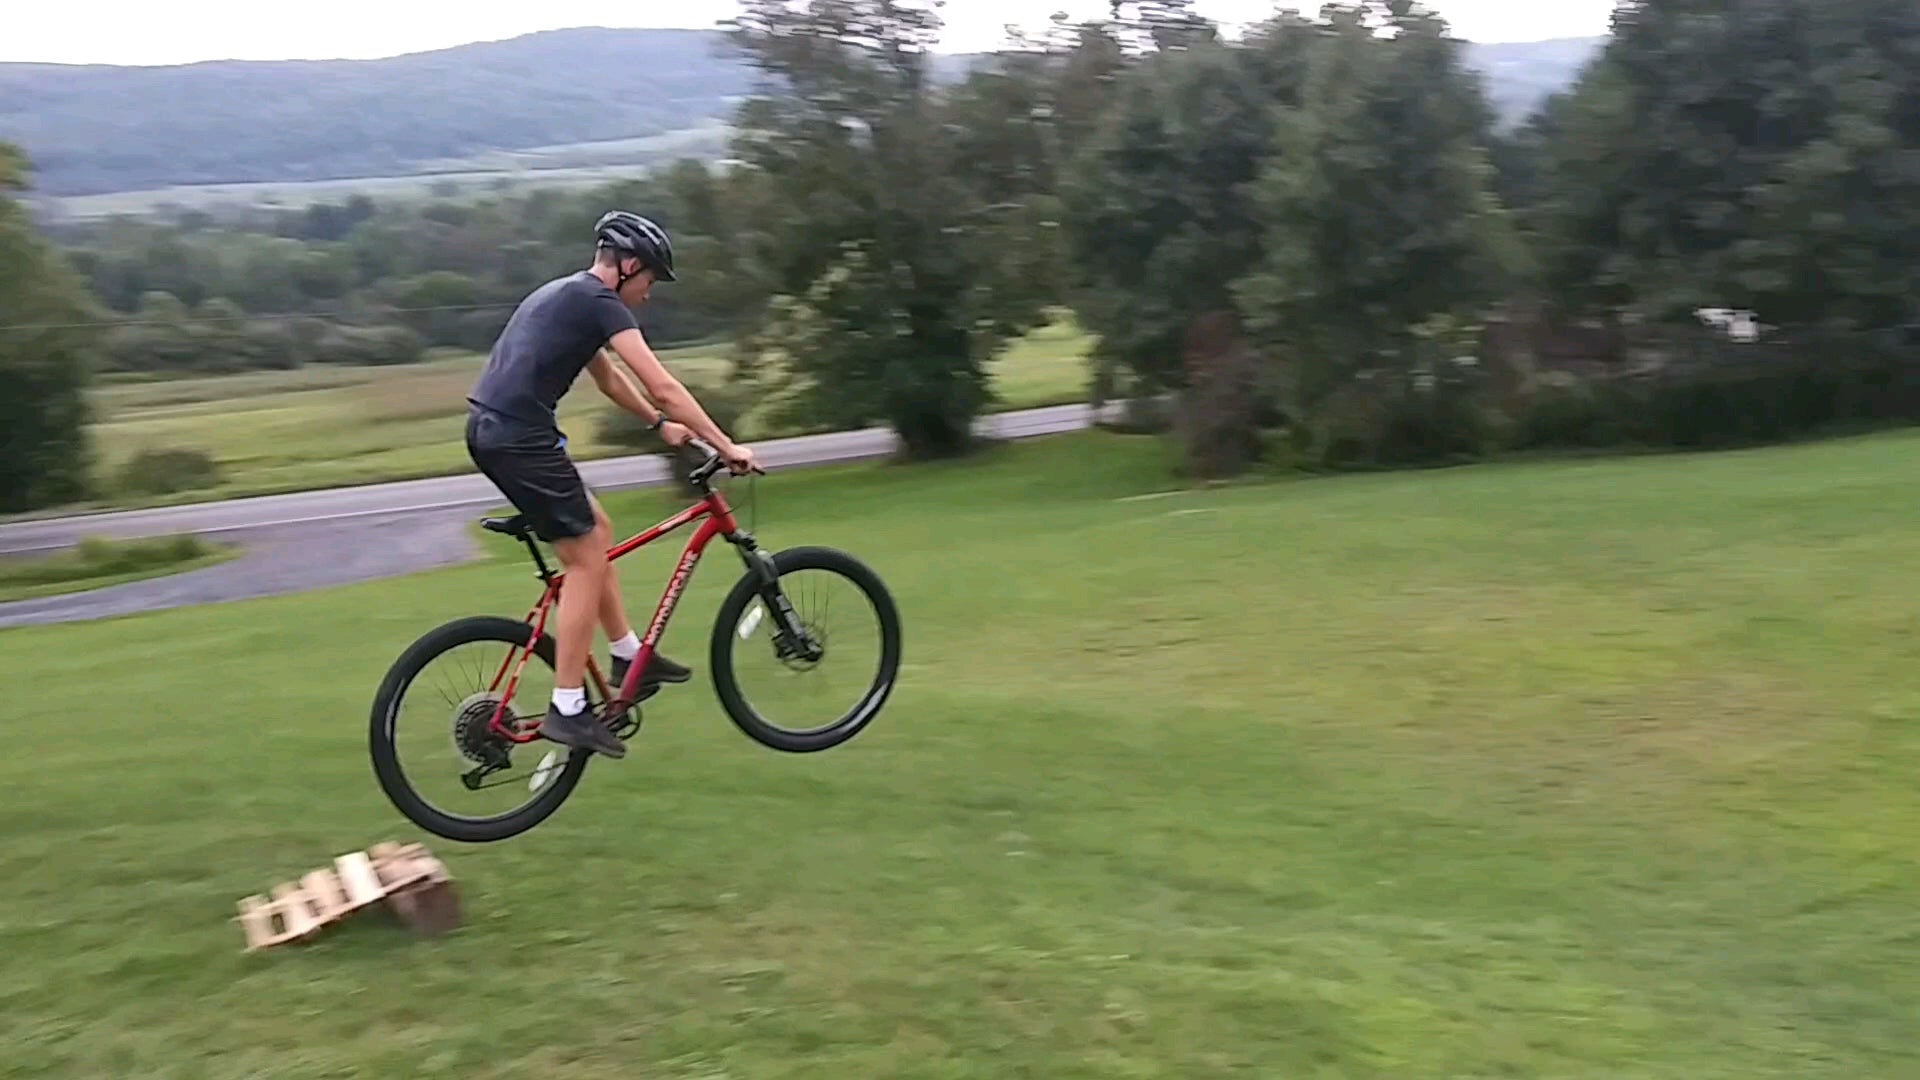 This is a small jump that I made of a log and some extra chopped wood : mountainbiking